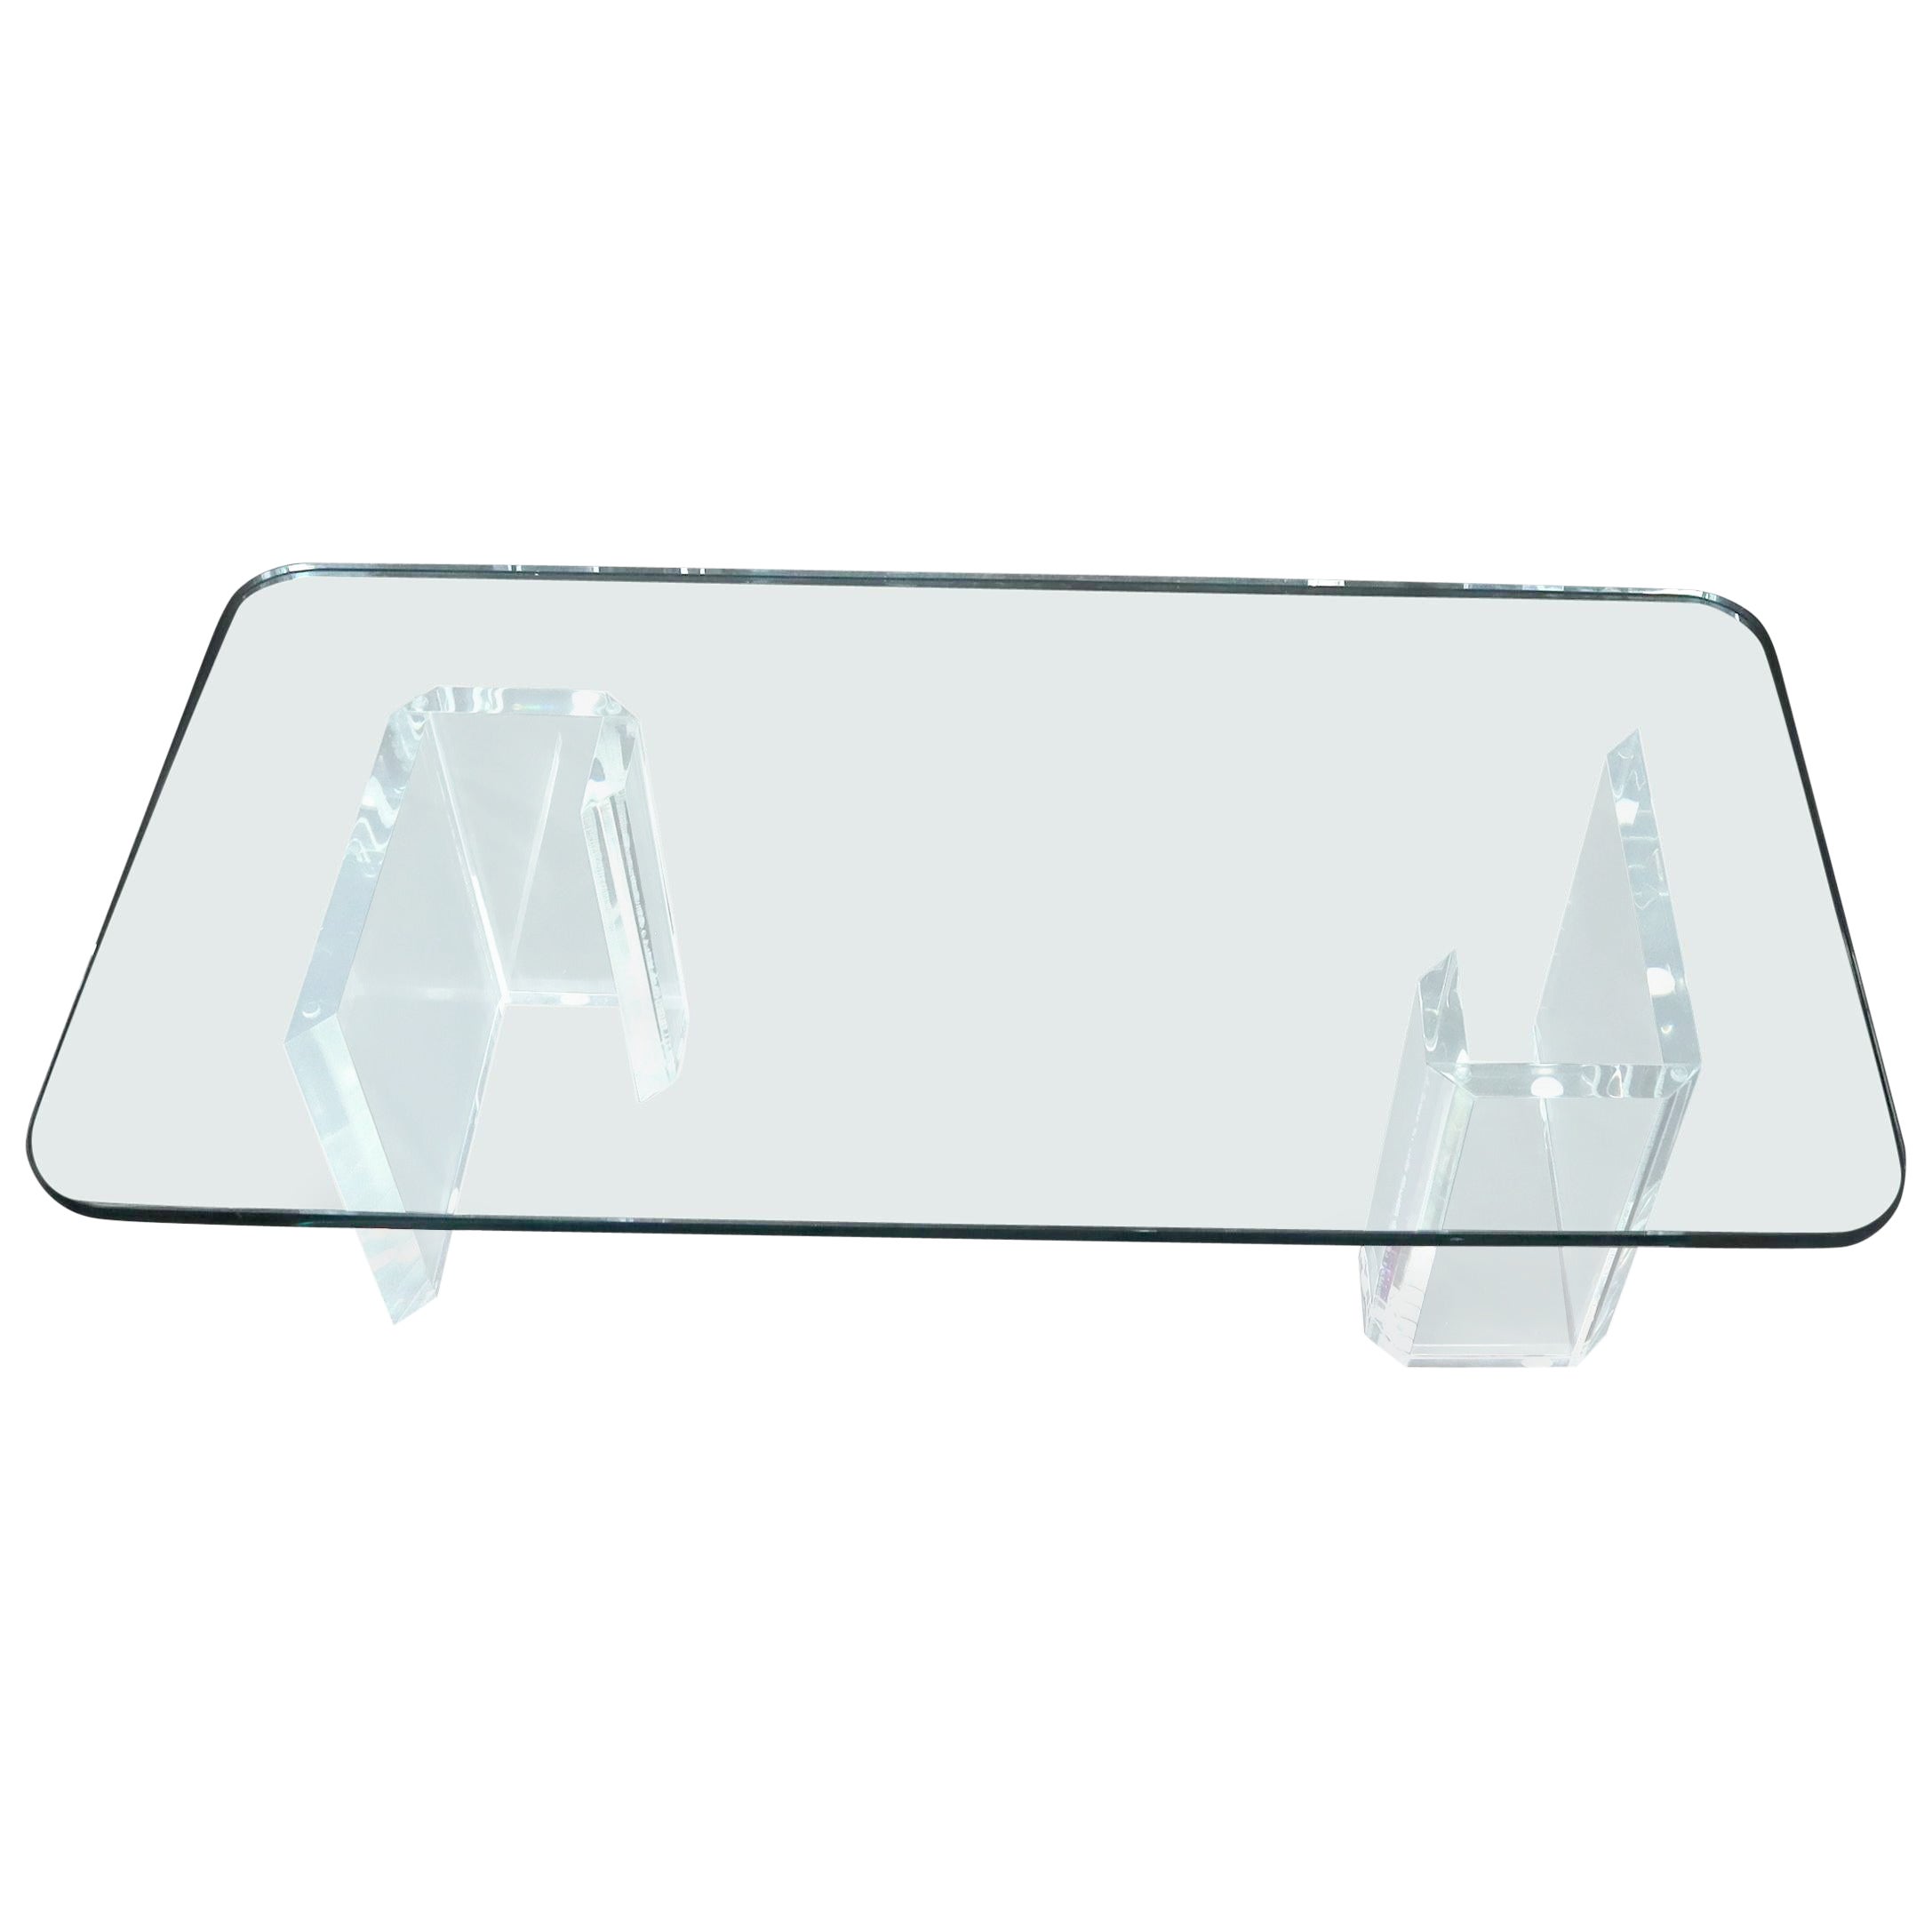 Lucite Base Glass Top Compact Rectangular Coffee Table